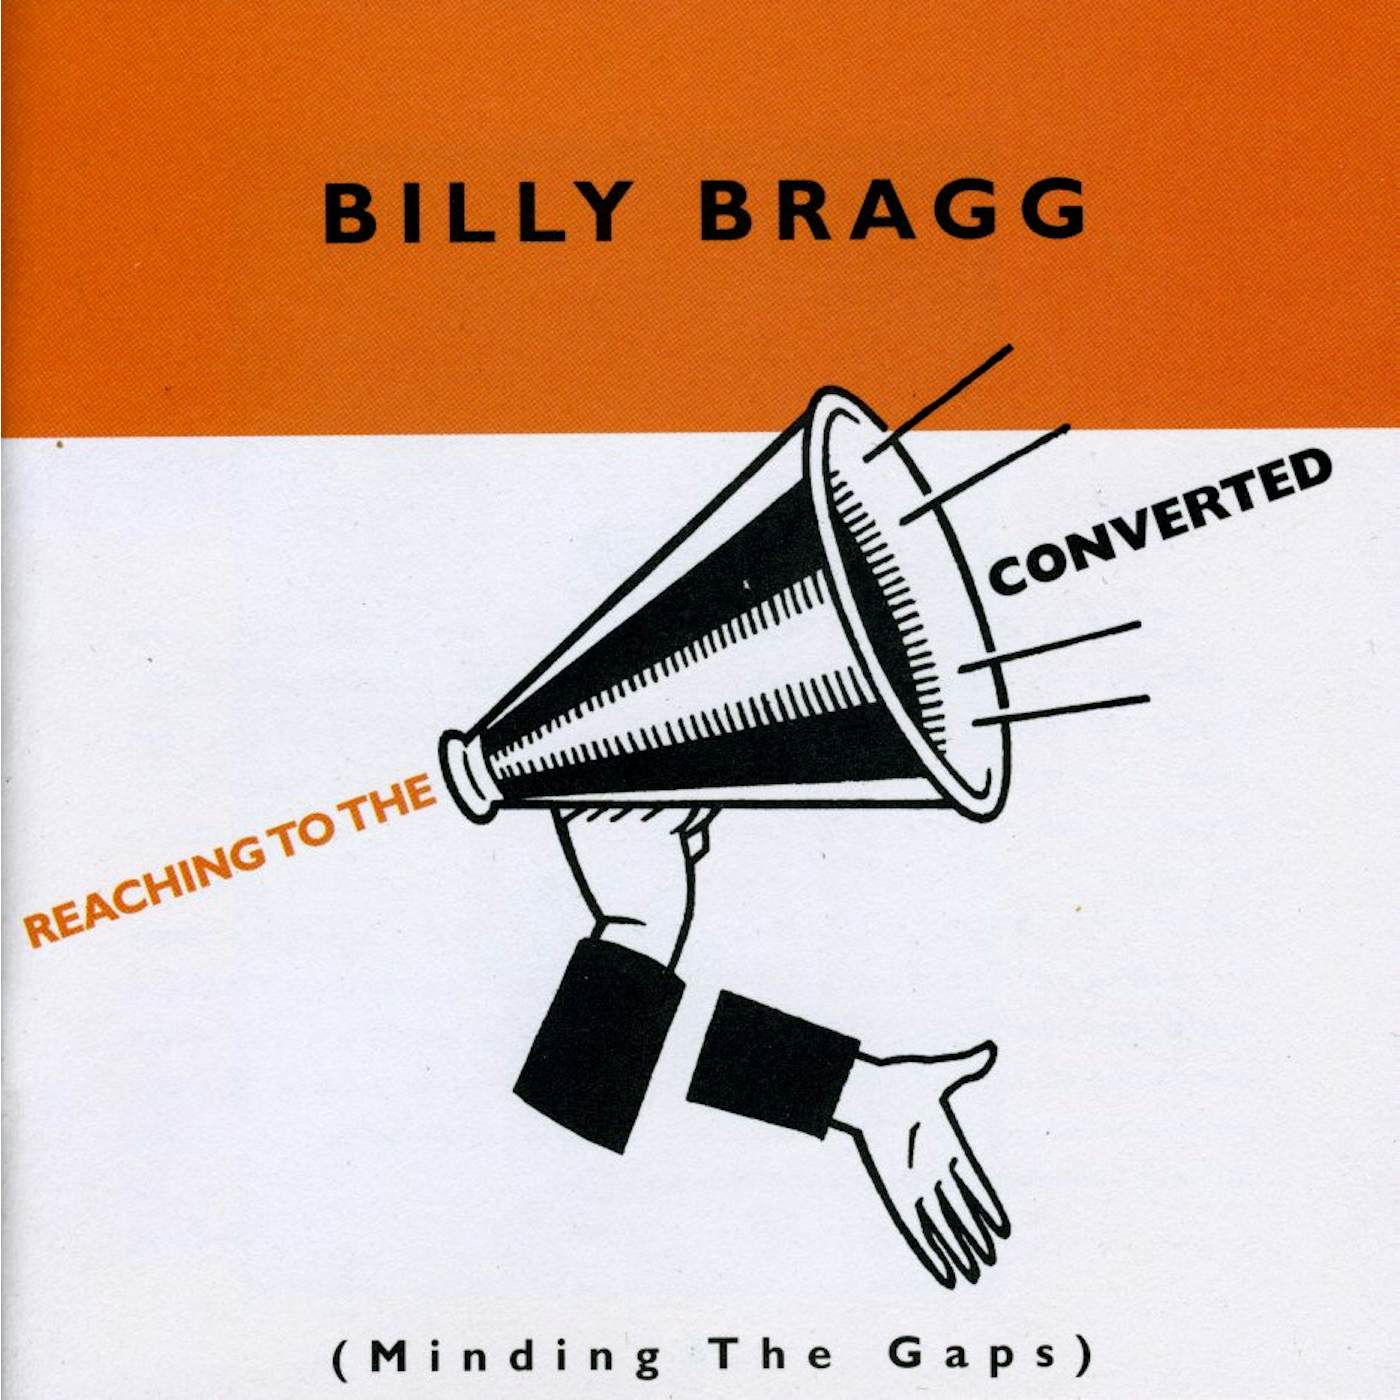 Billy Bragg REACHING TO THE CONVERTED CD